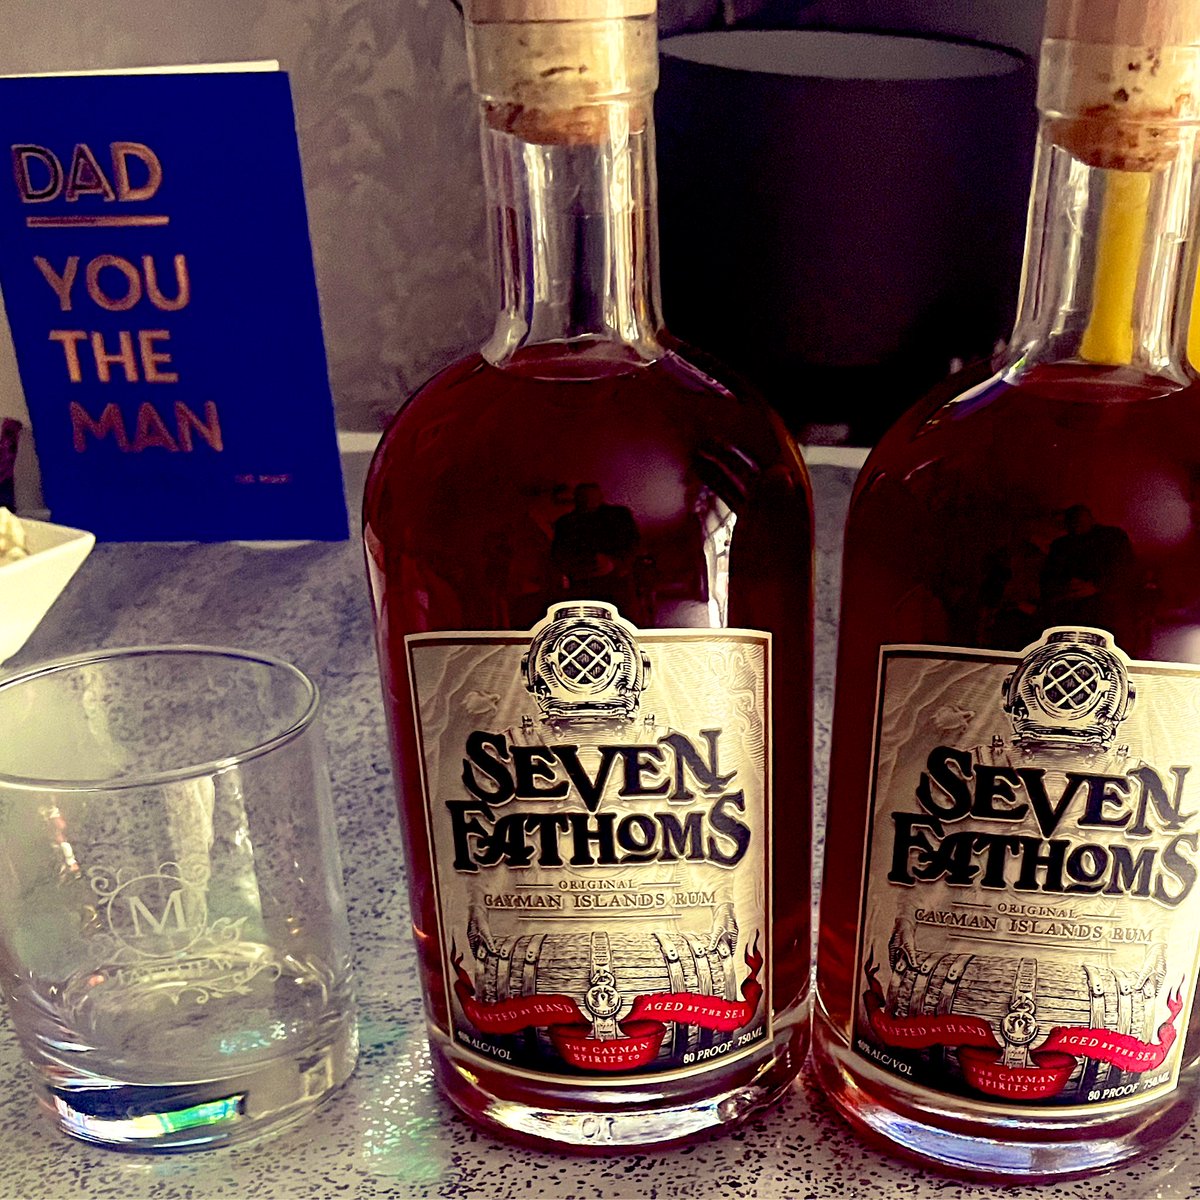 Thank you for all your birthday wishes, means a lot. I’m going to sit down after a great day & toast my 40th with a fantastic rum! 🥃💙
#sevenfathoms #40thbirthday #luckyman #40sclub